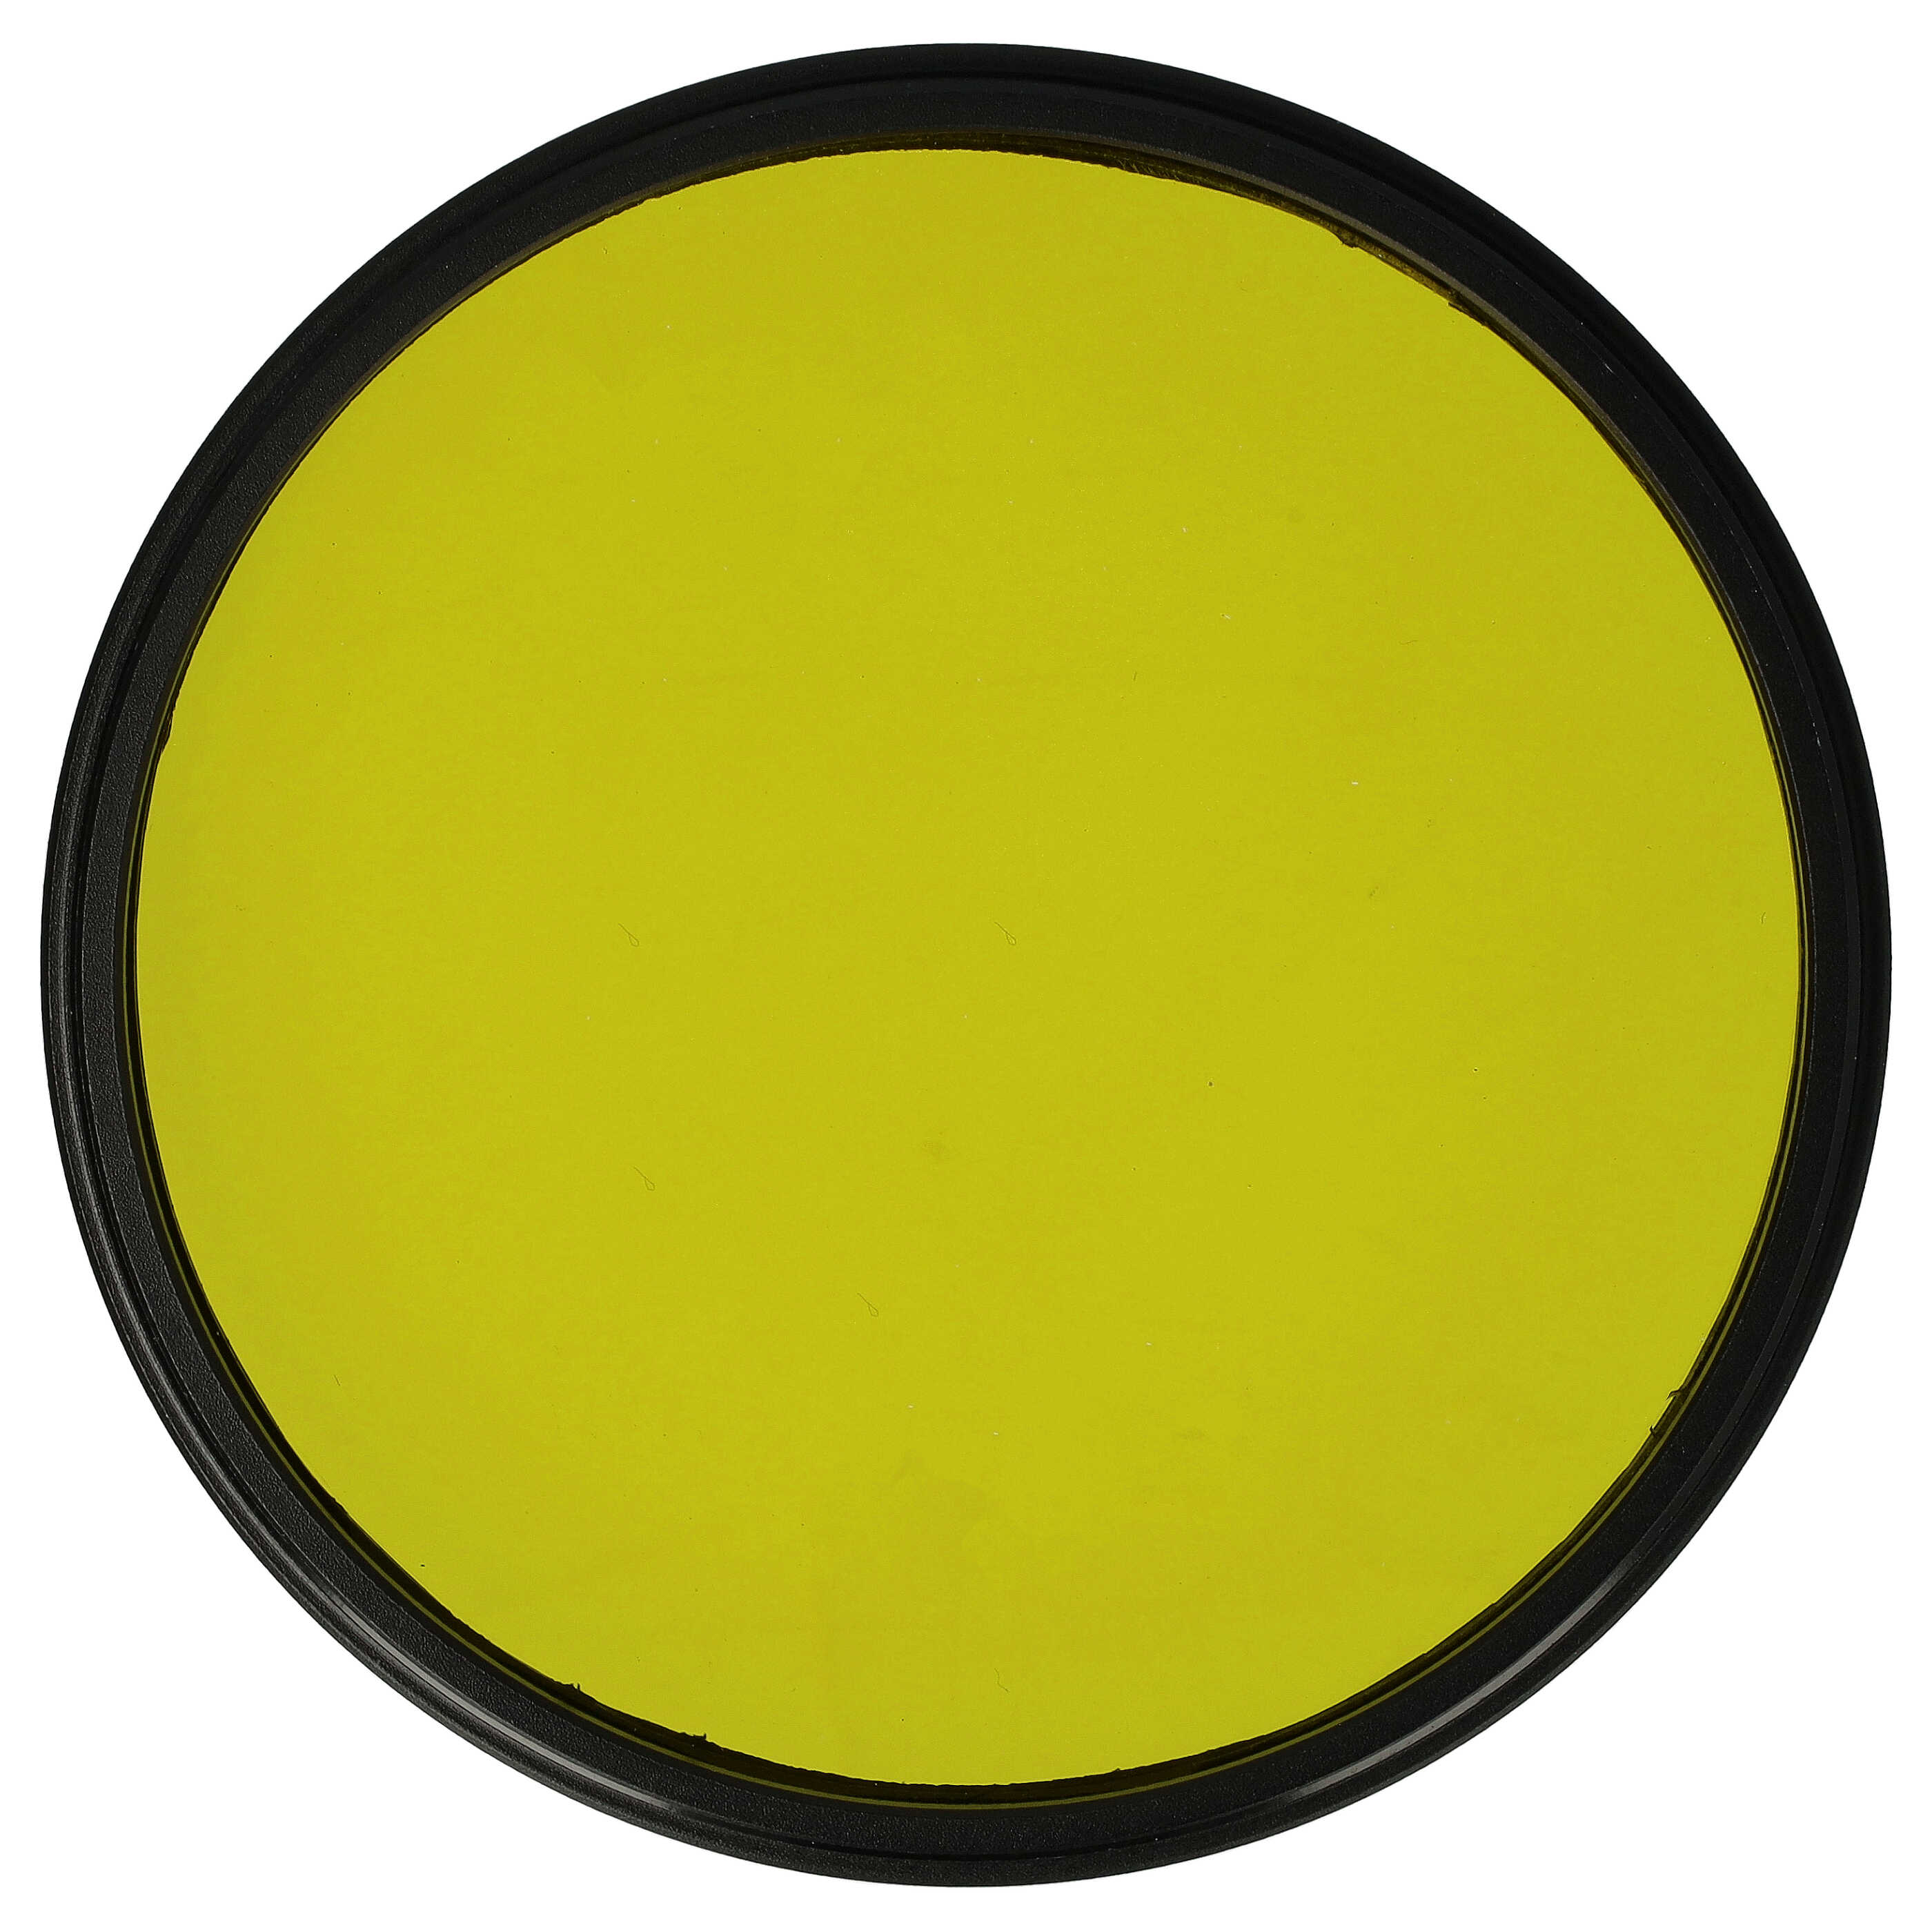 Coloured Filter, Yellow suitable for Camera Lenses with 77 mm Filter Thread - Yellow Filter